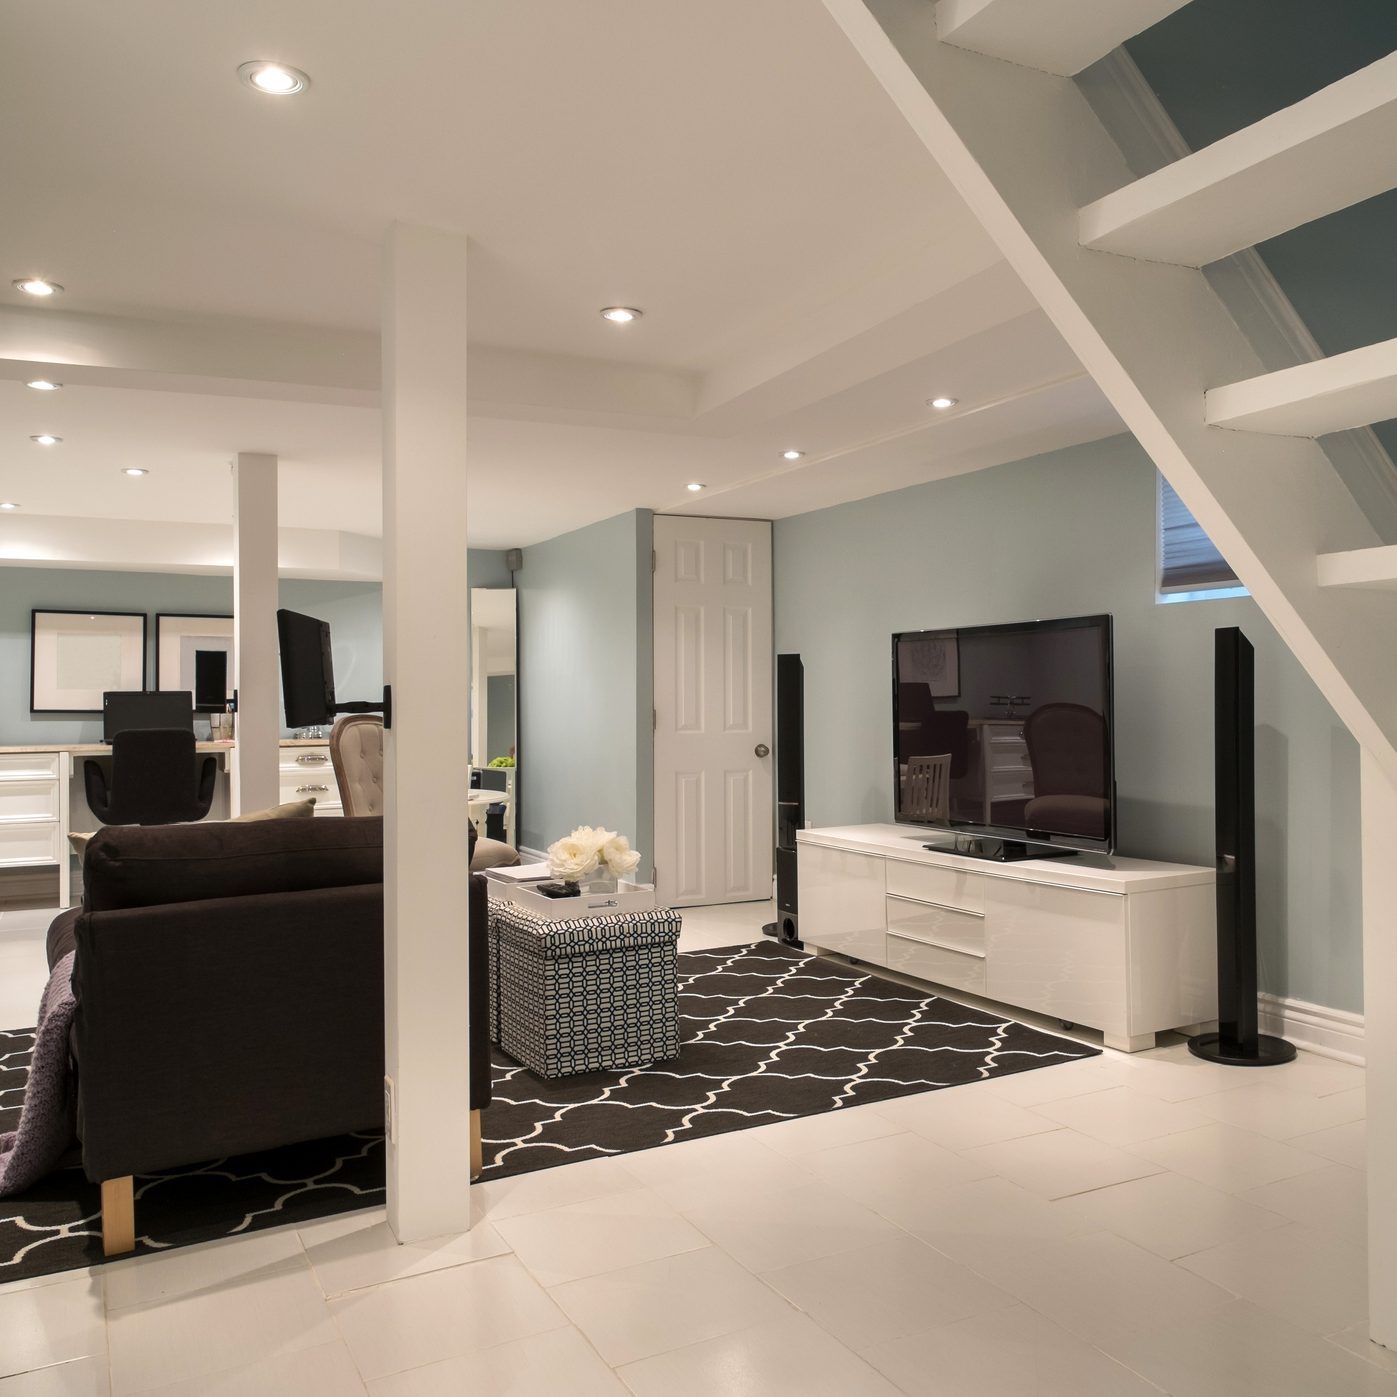 10 Finished Basement Ideas: How to Design and Furnish Your Space Like a Pro